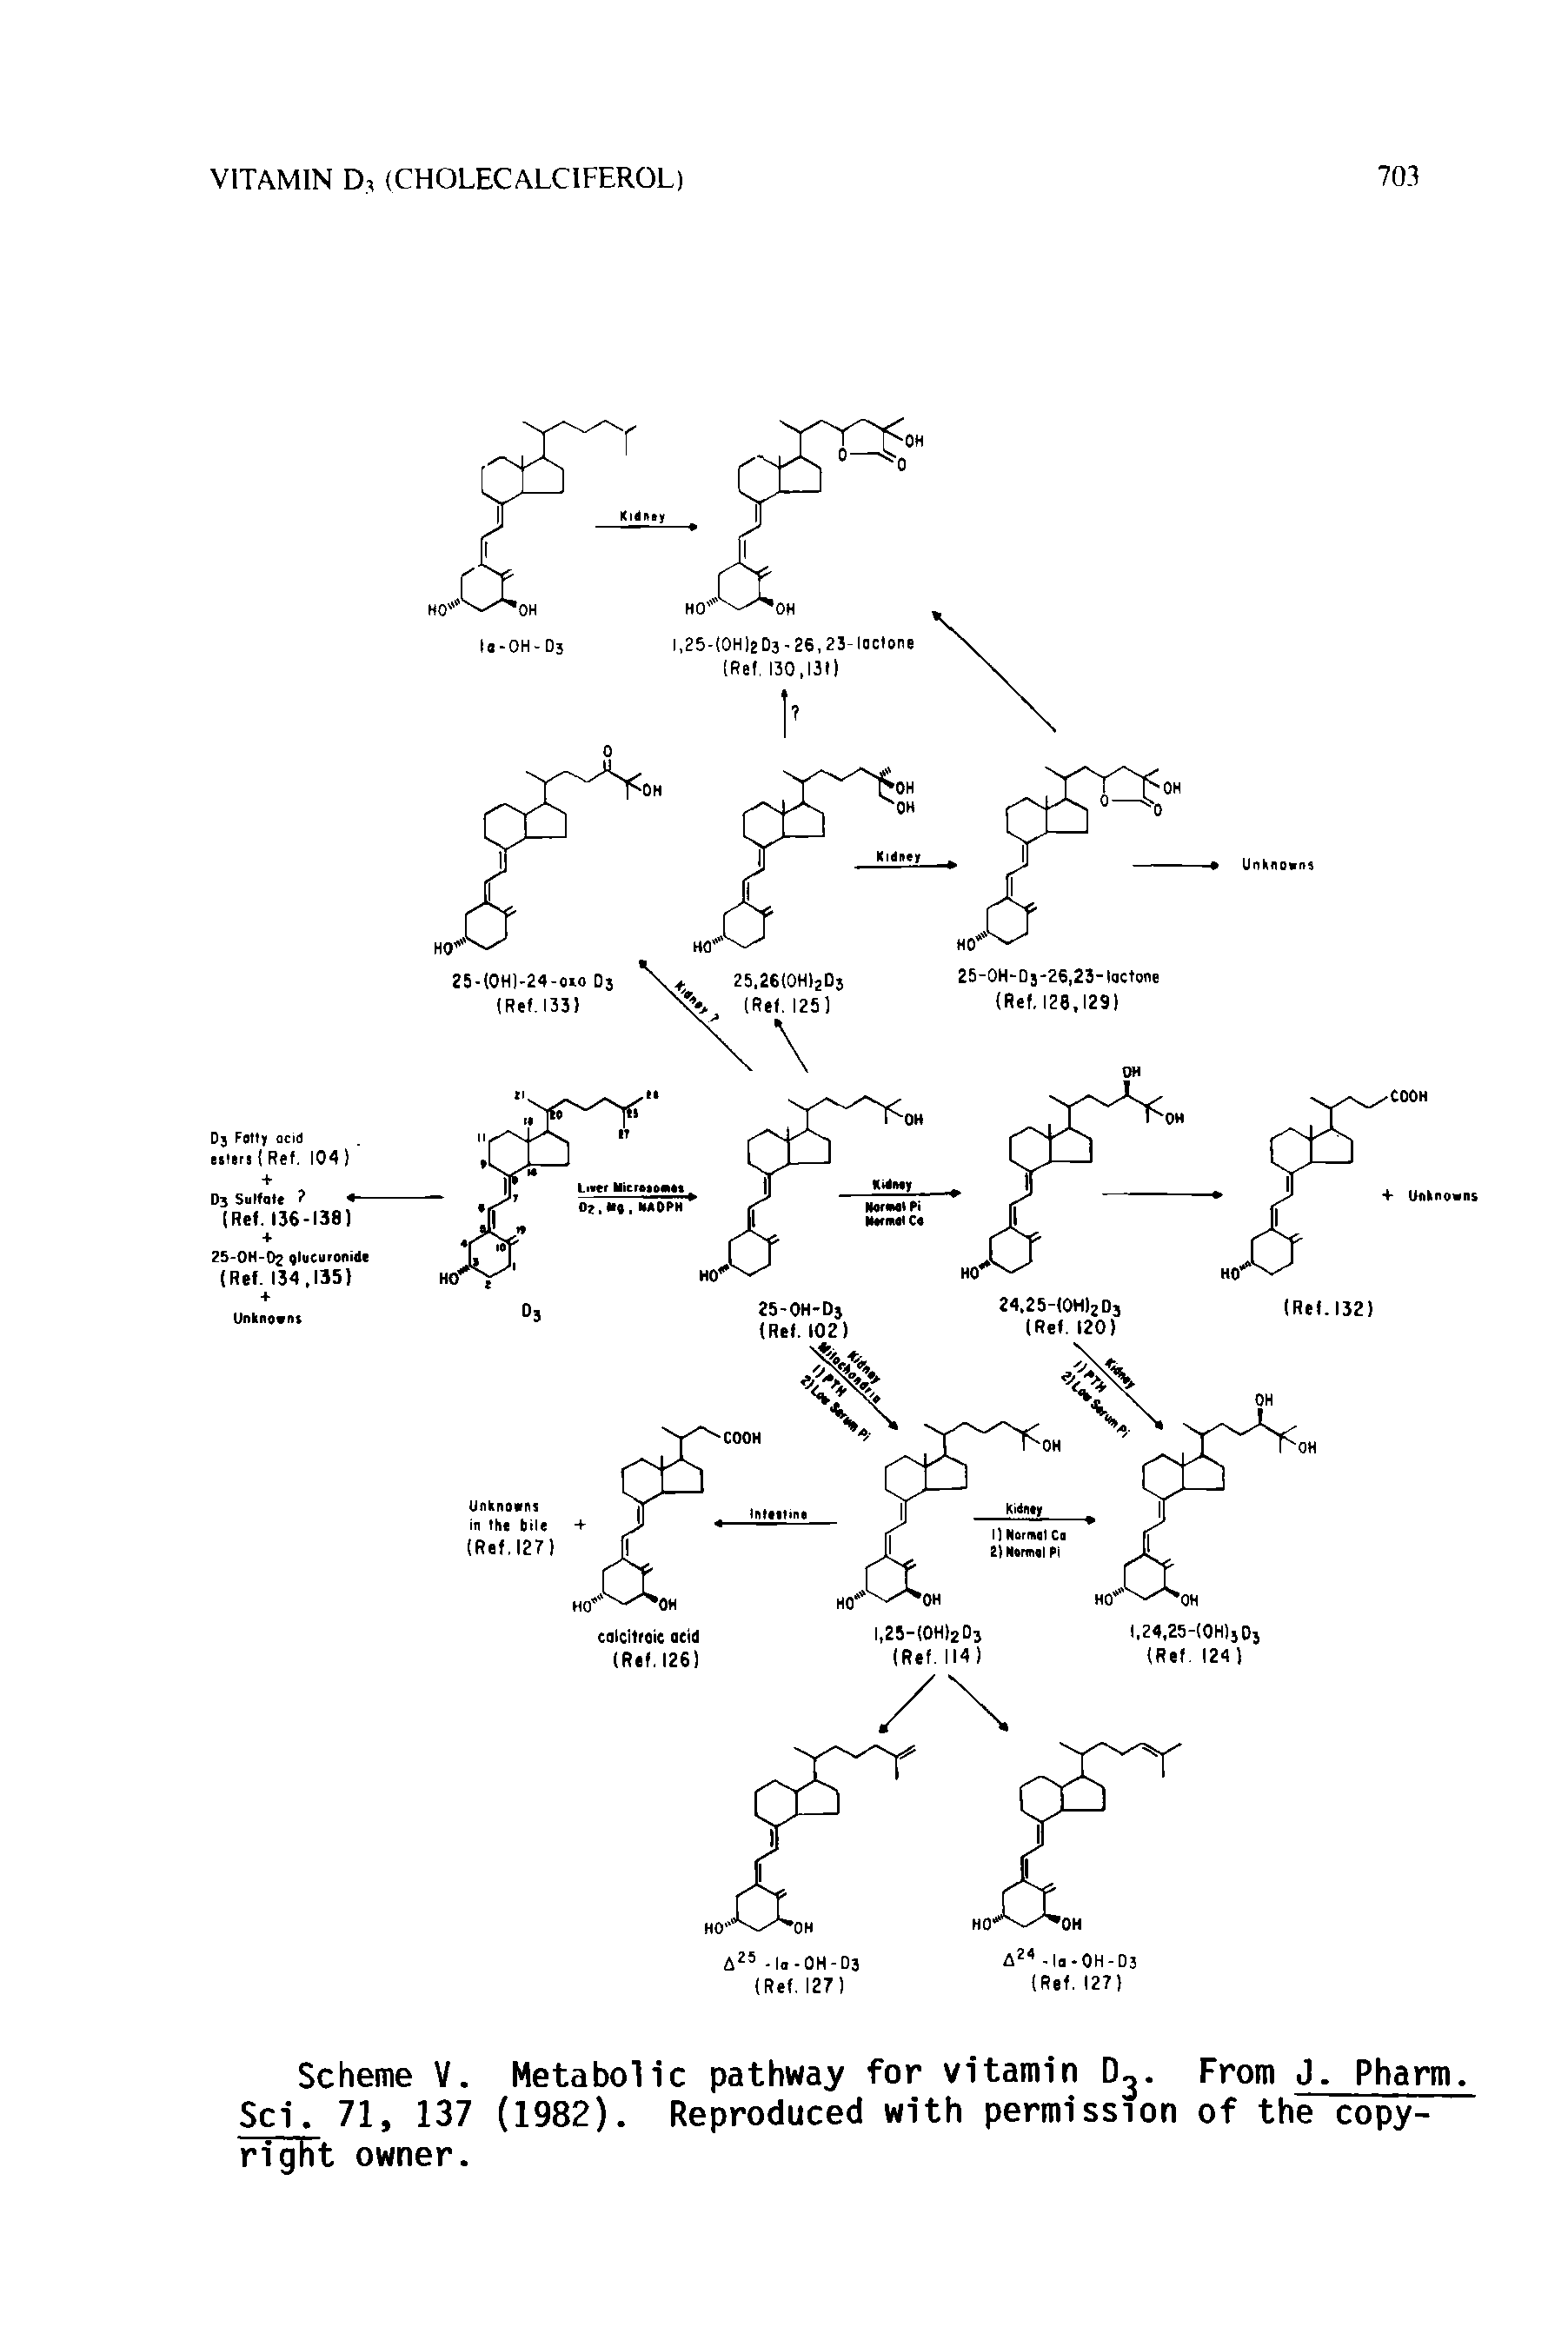 Scheme V. Metabolic pathway for vitamin D. From J. Pharm. Sci. 71, 137 (1982). Reproduced with permission of the copy-right owner.